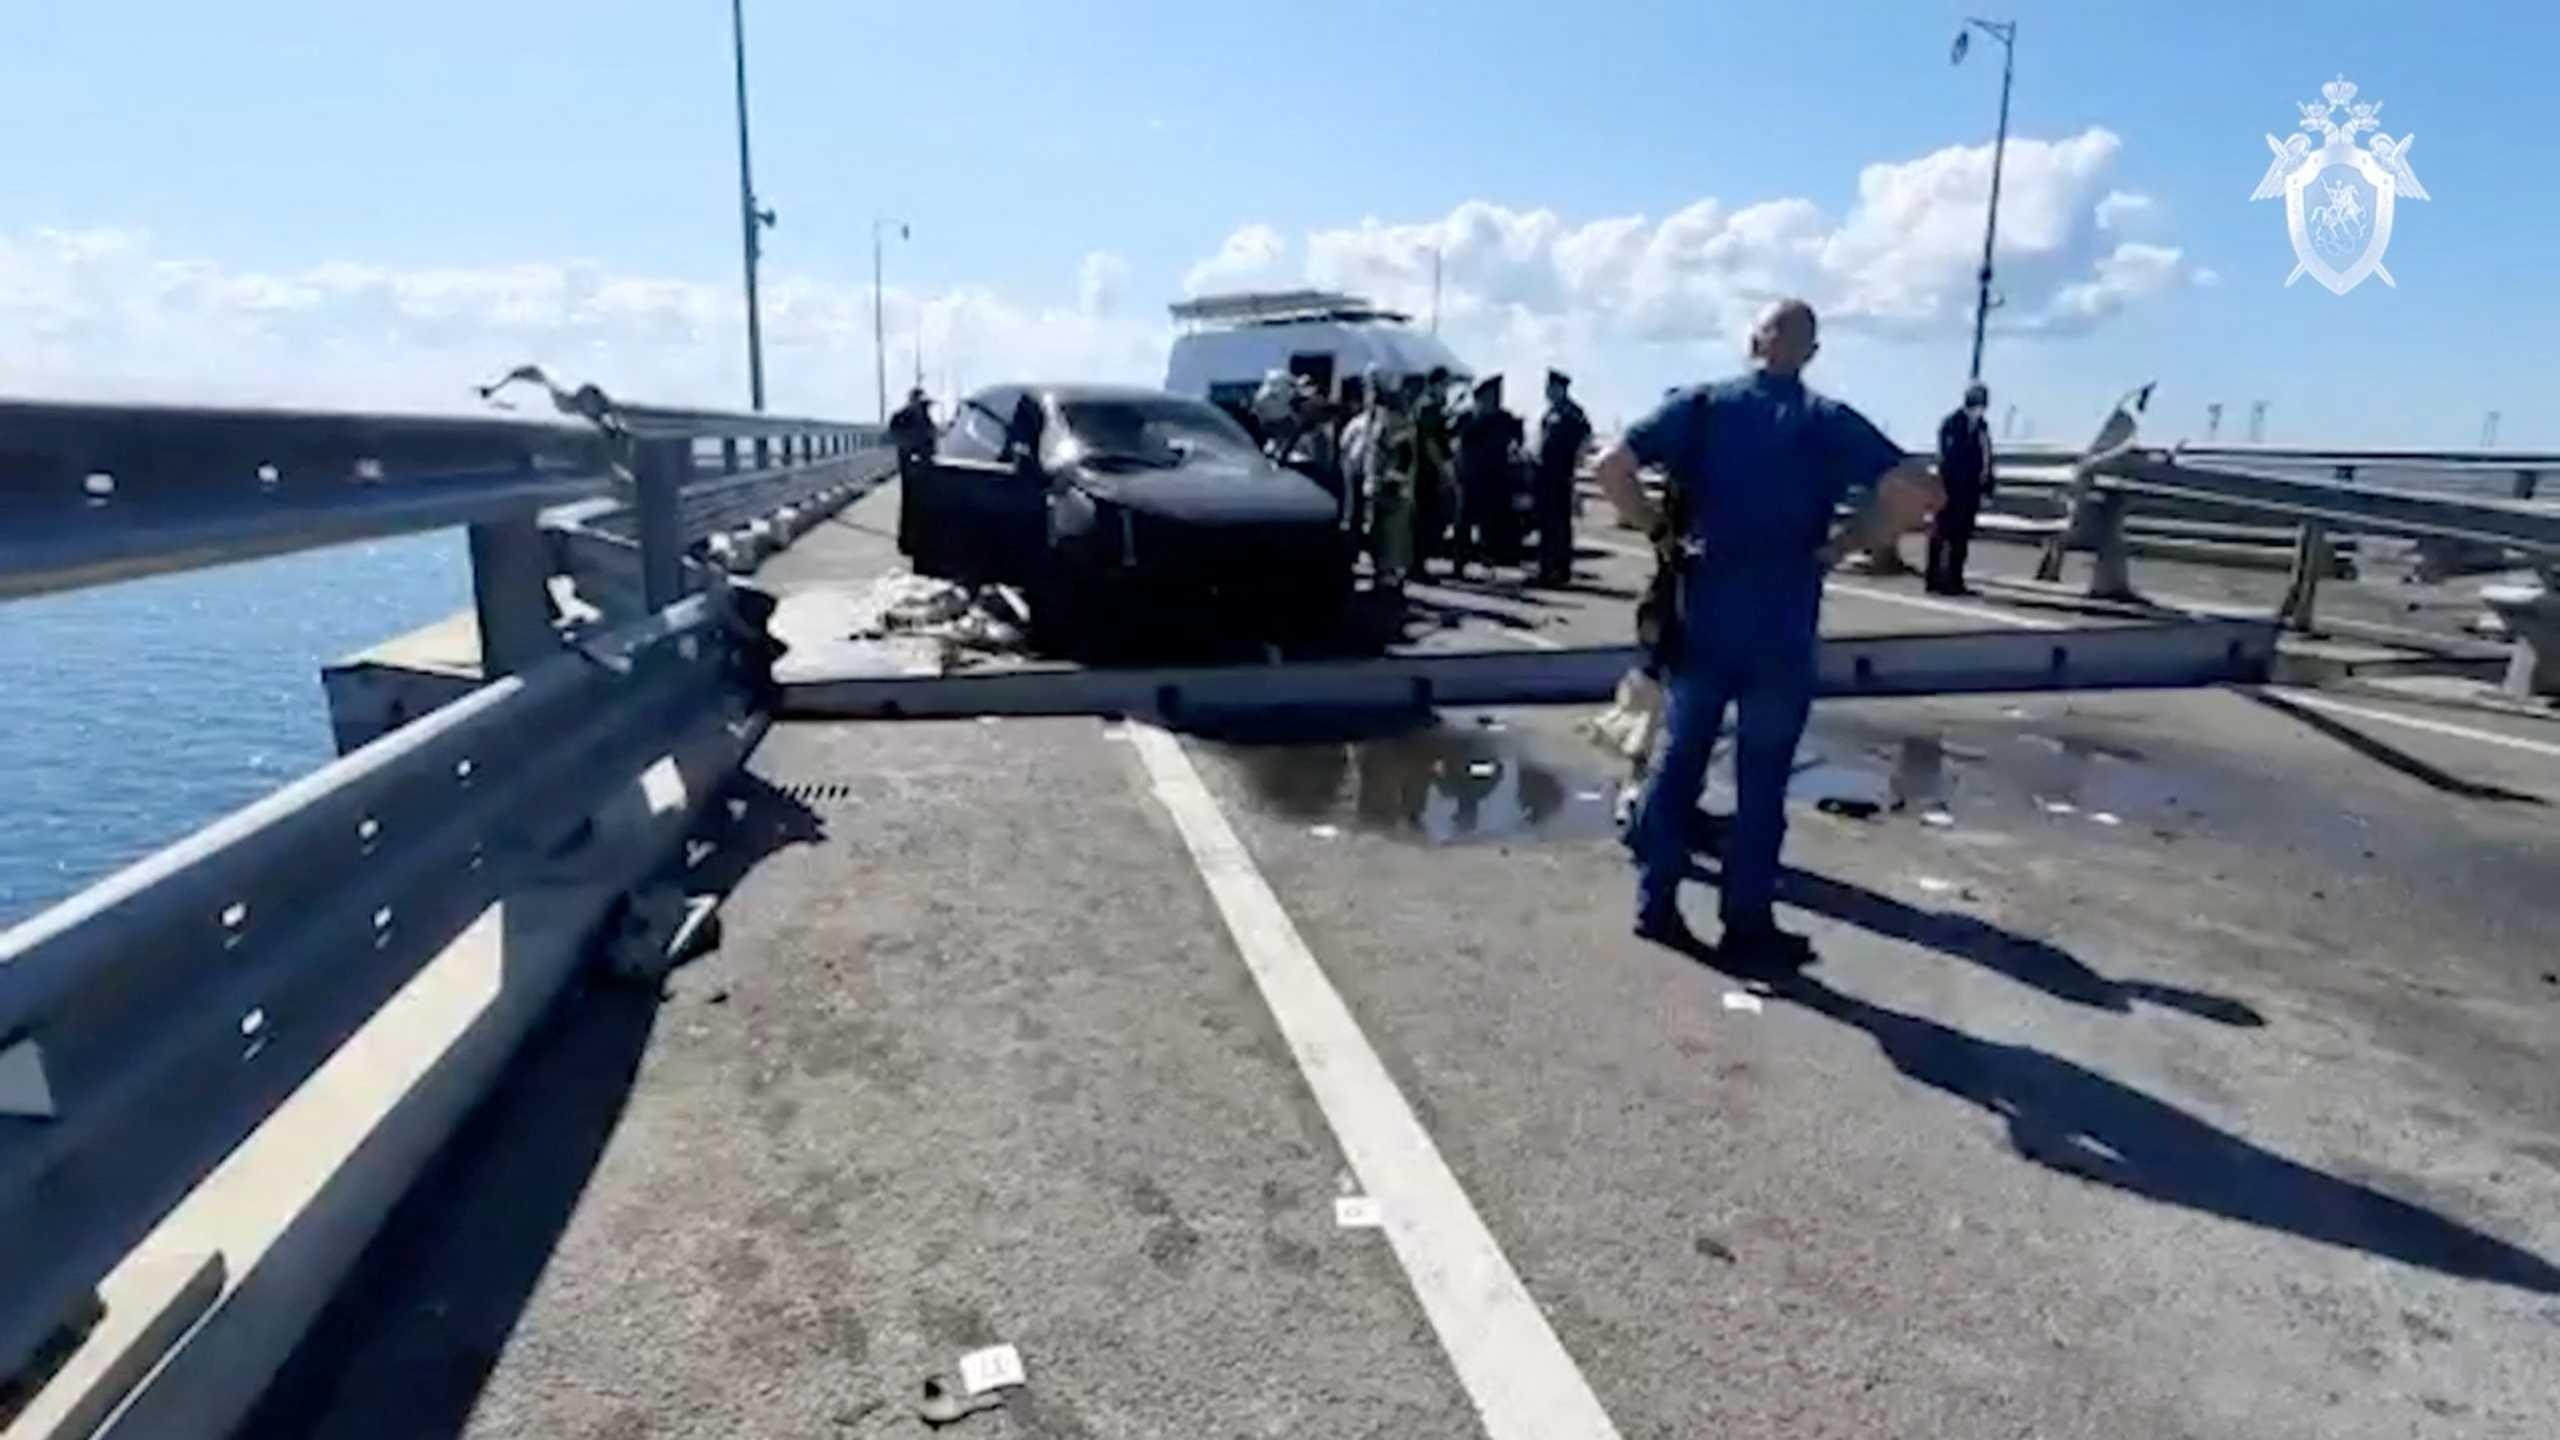 Russian investigators and emergency services' members gather near a destroyed car at the accident scene on the damaged section of a road following an alleged attack on the Crimea Bridge, in this still image taken from video released July 17. Photo: Reuters